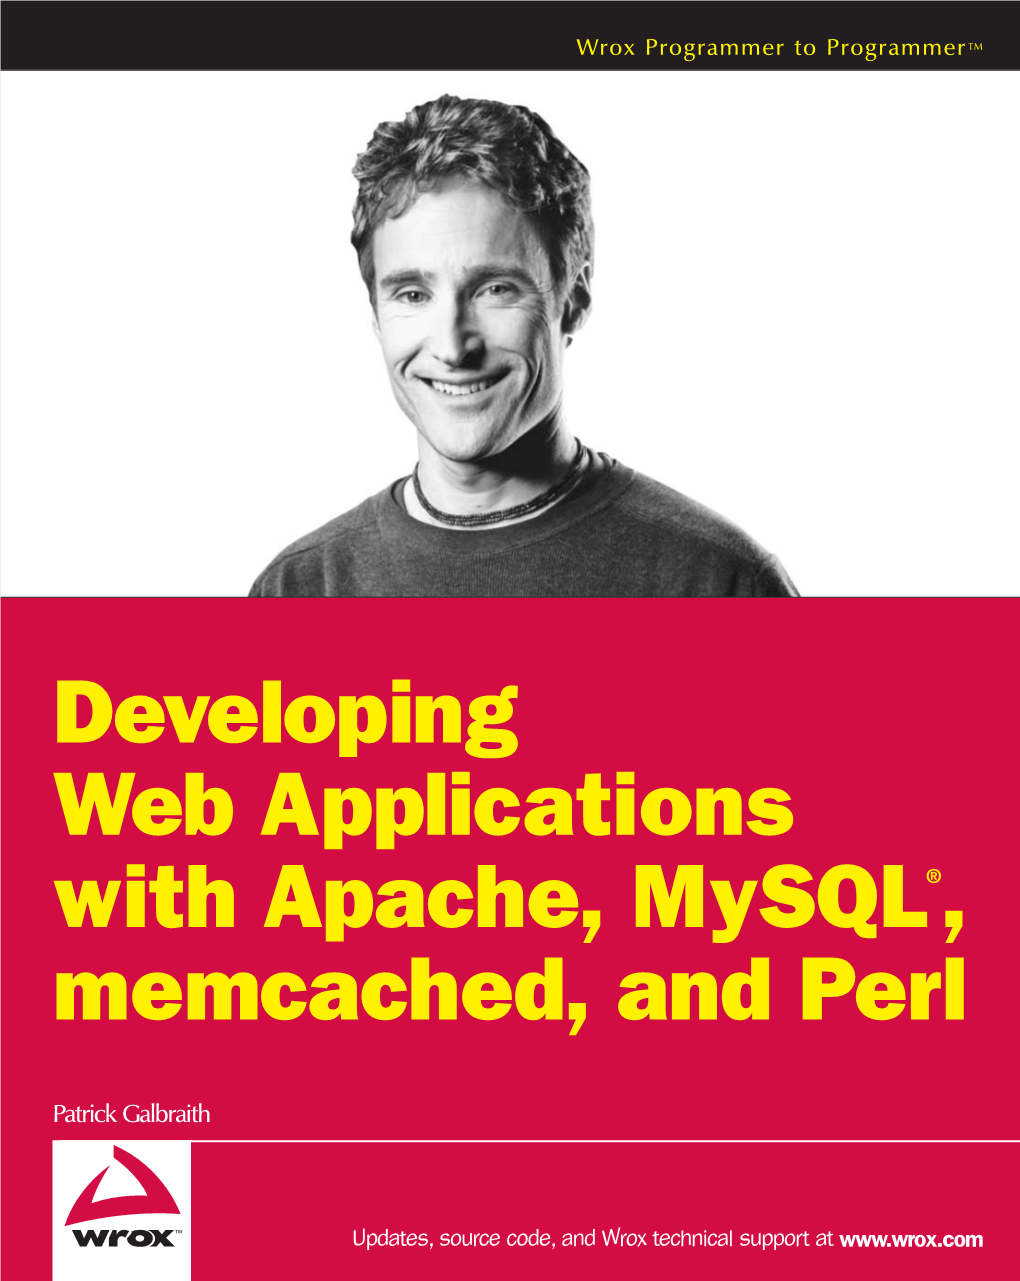 Developing Web Applications with Apache, Mysql®, Memcached